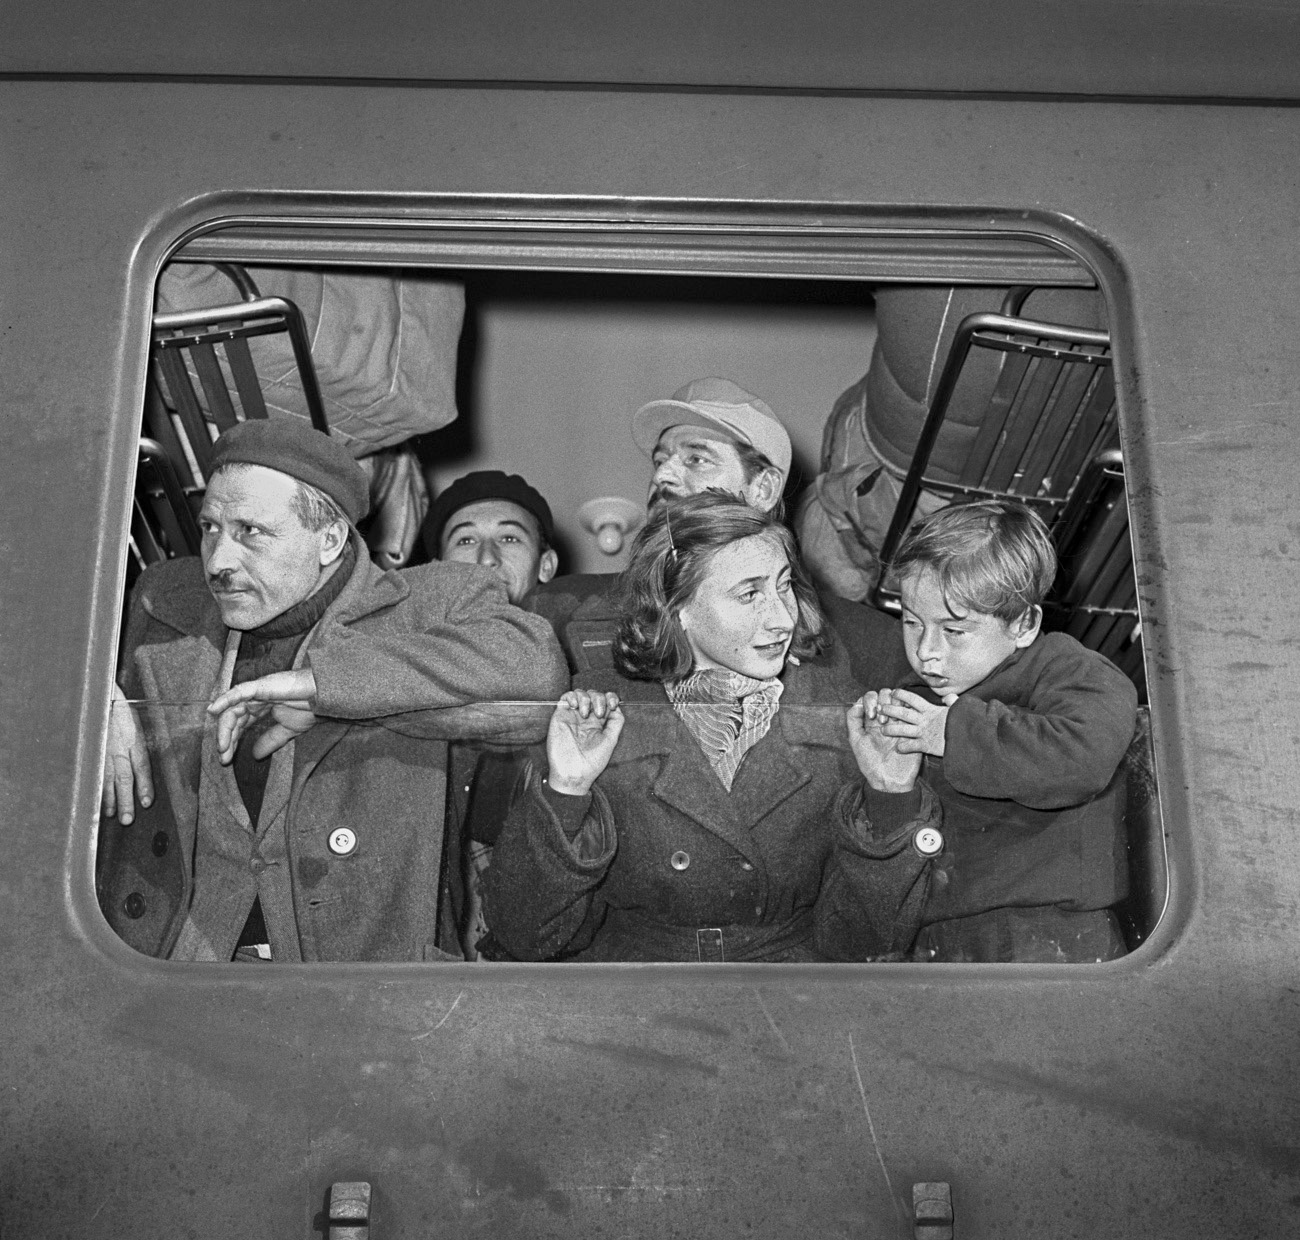 The first Hungarian refugees of the Hungarian Revolution arrive at the border station in Buchs, Switzerland, on November 8, 1956.